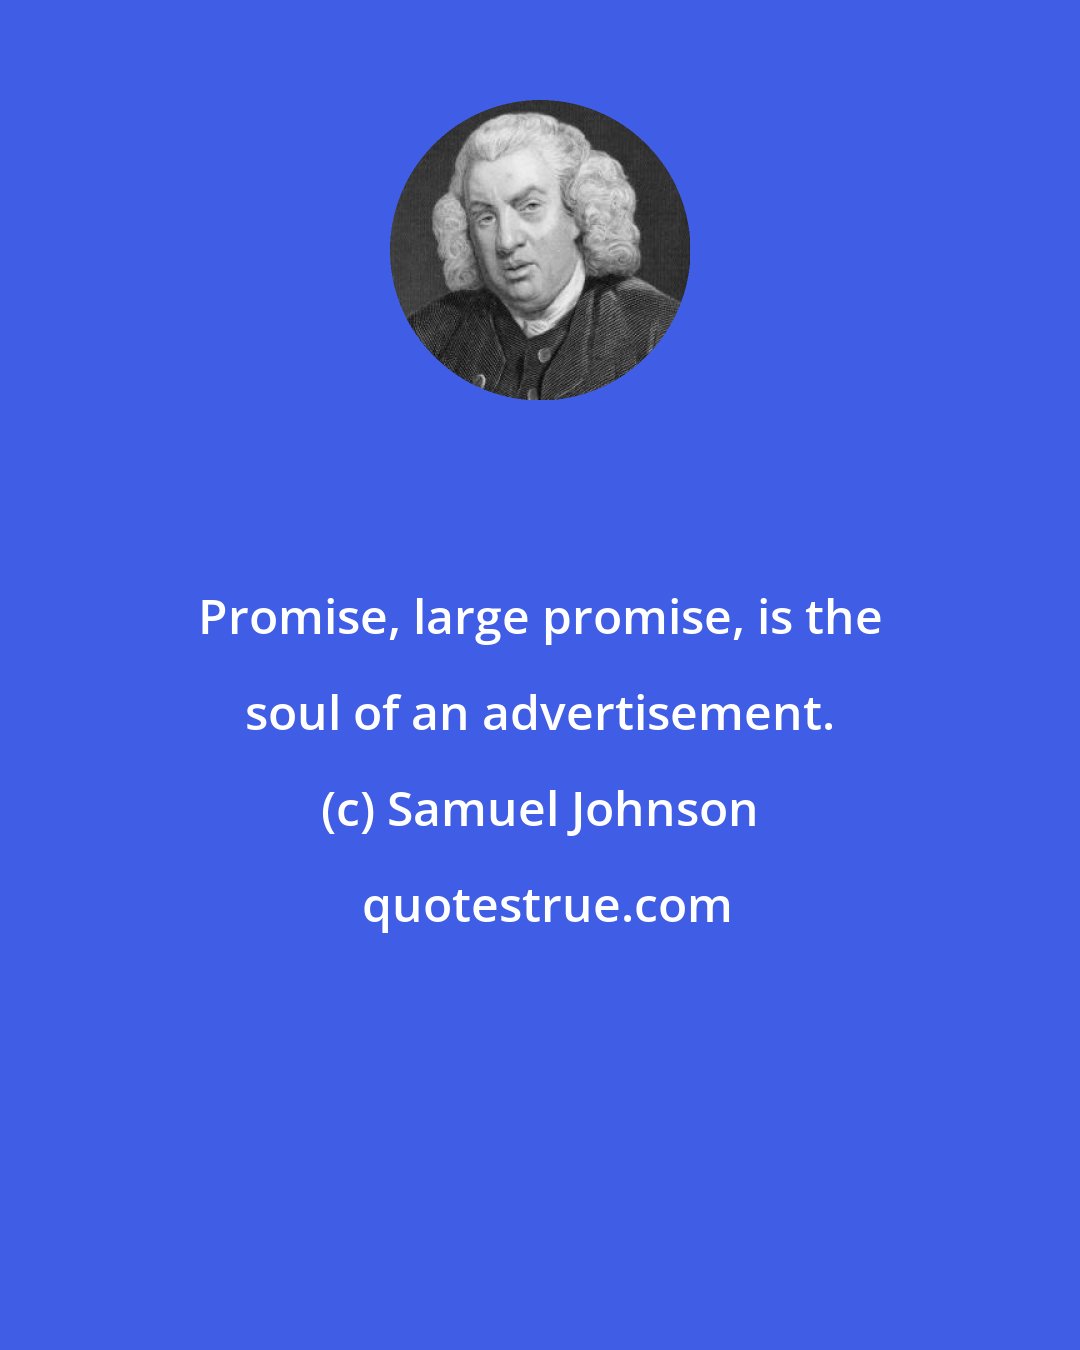 Samuel Johnson: Promise, large promise, is the soul of an advertisement.